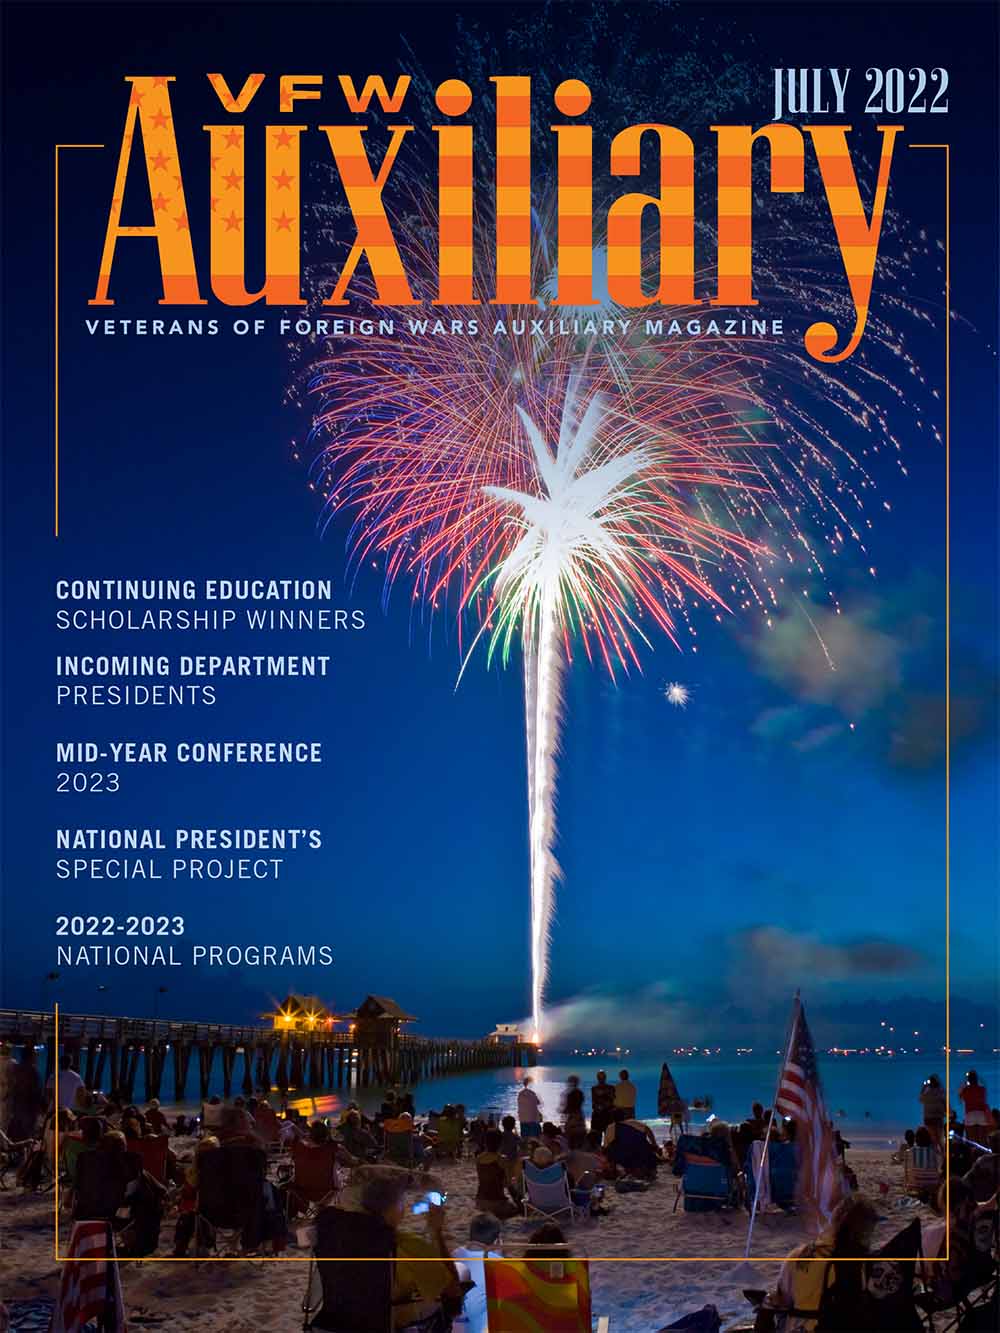 VFW Auxiliary Magazine, July 2022 cover